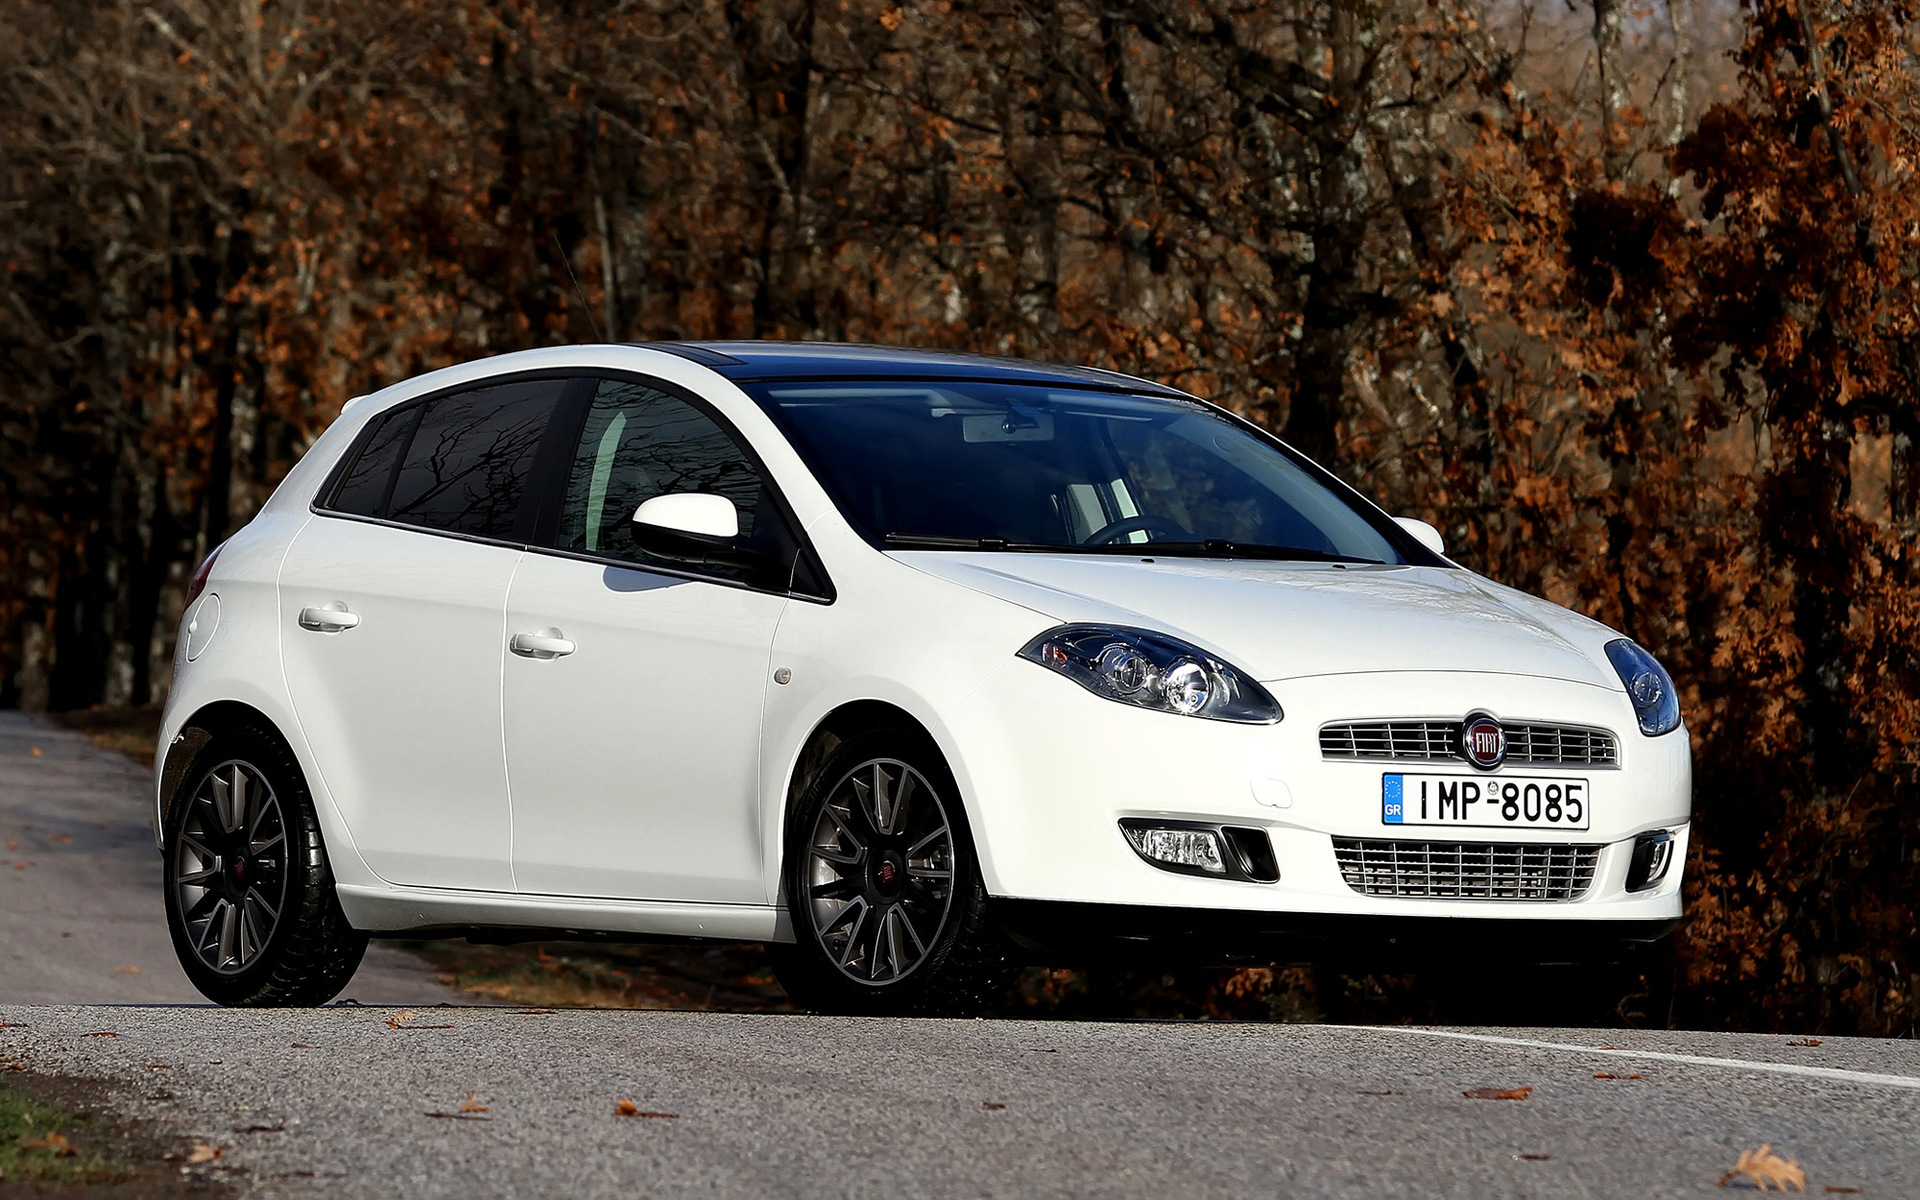 2010 Fiat Bravo - Wallpapers and HD Images | Car Pixel